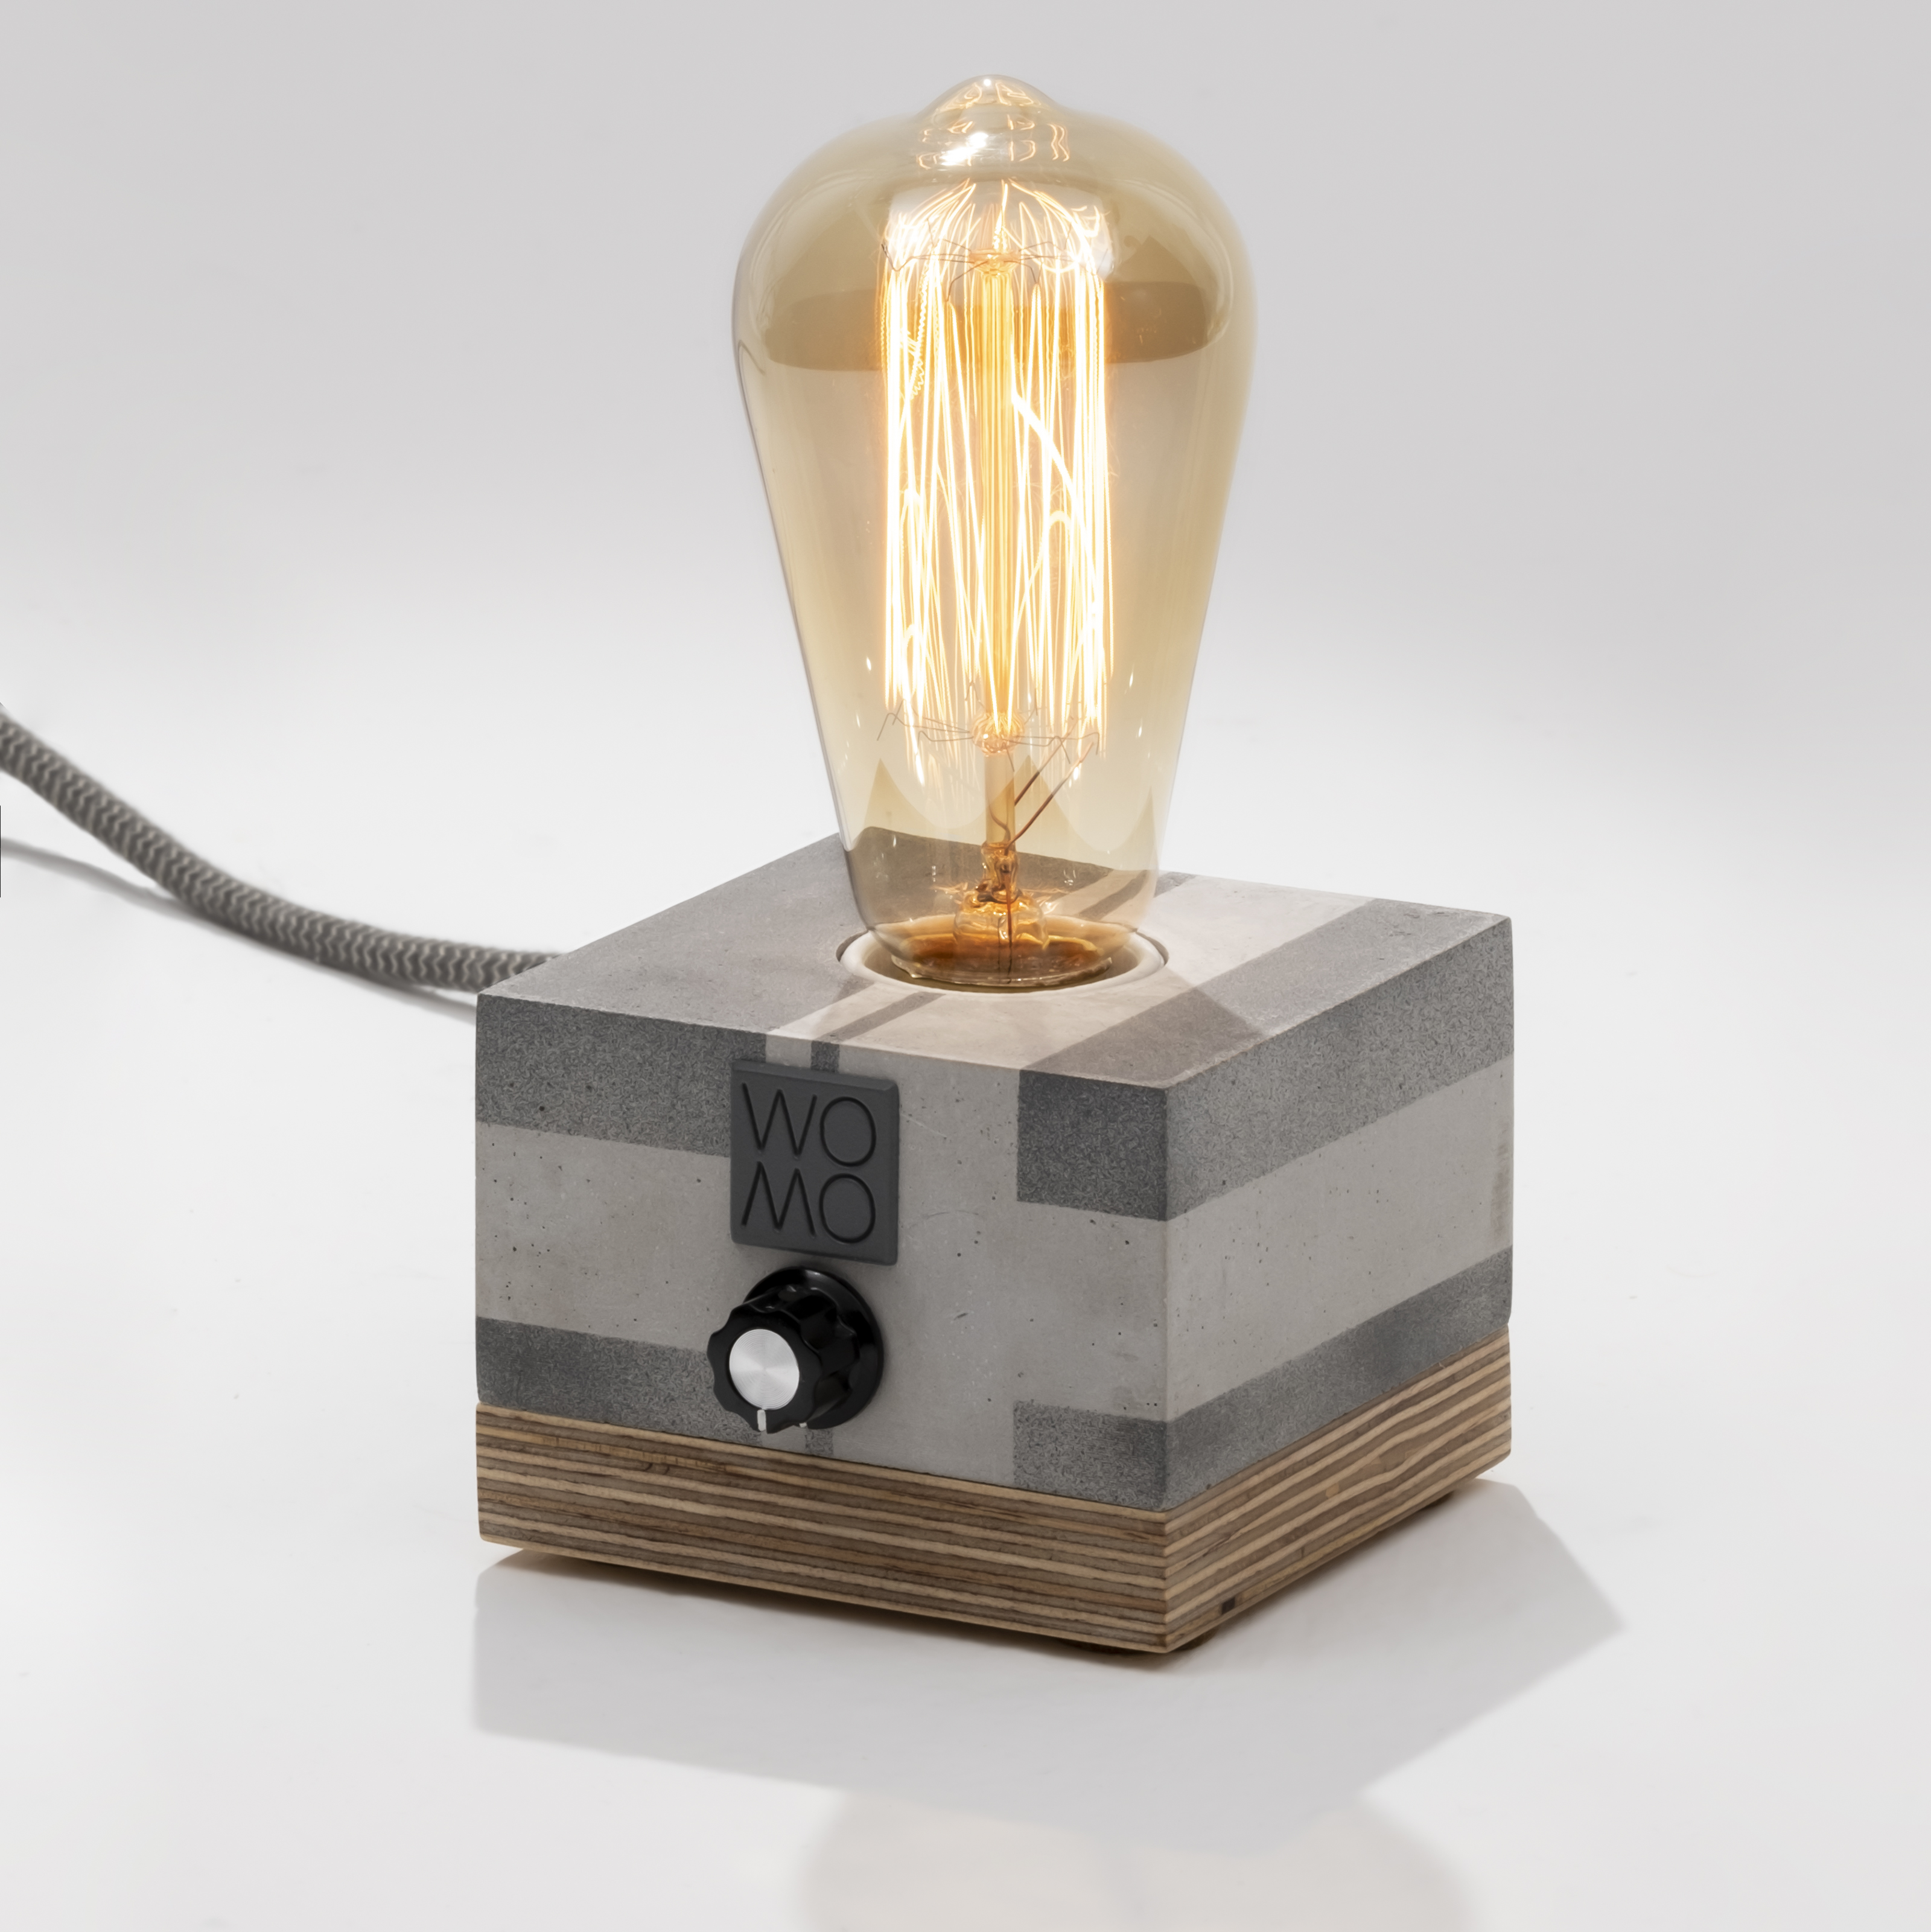 Circuit Antresit Concrete Table Lamp with Dimmer - Cylinder